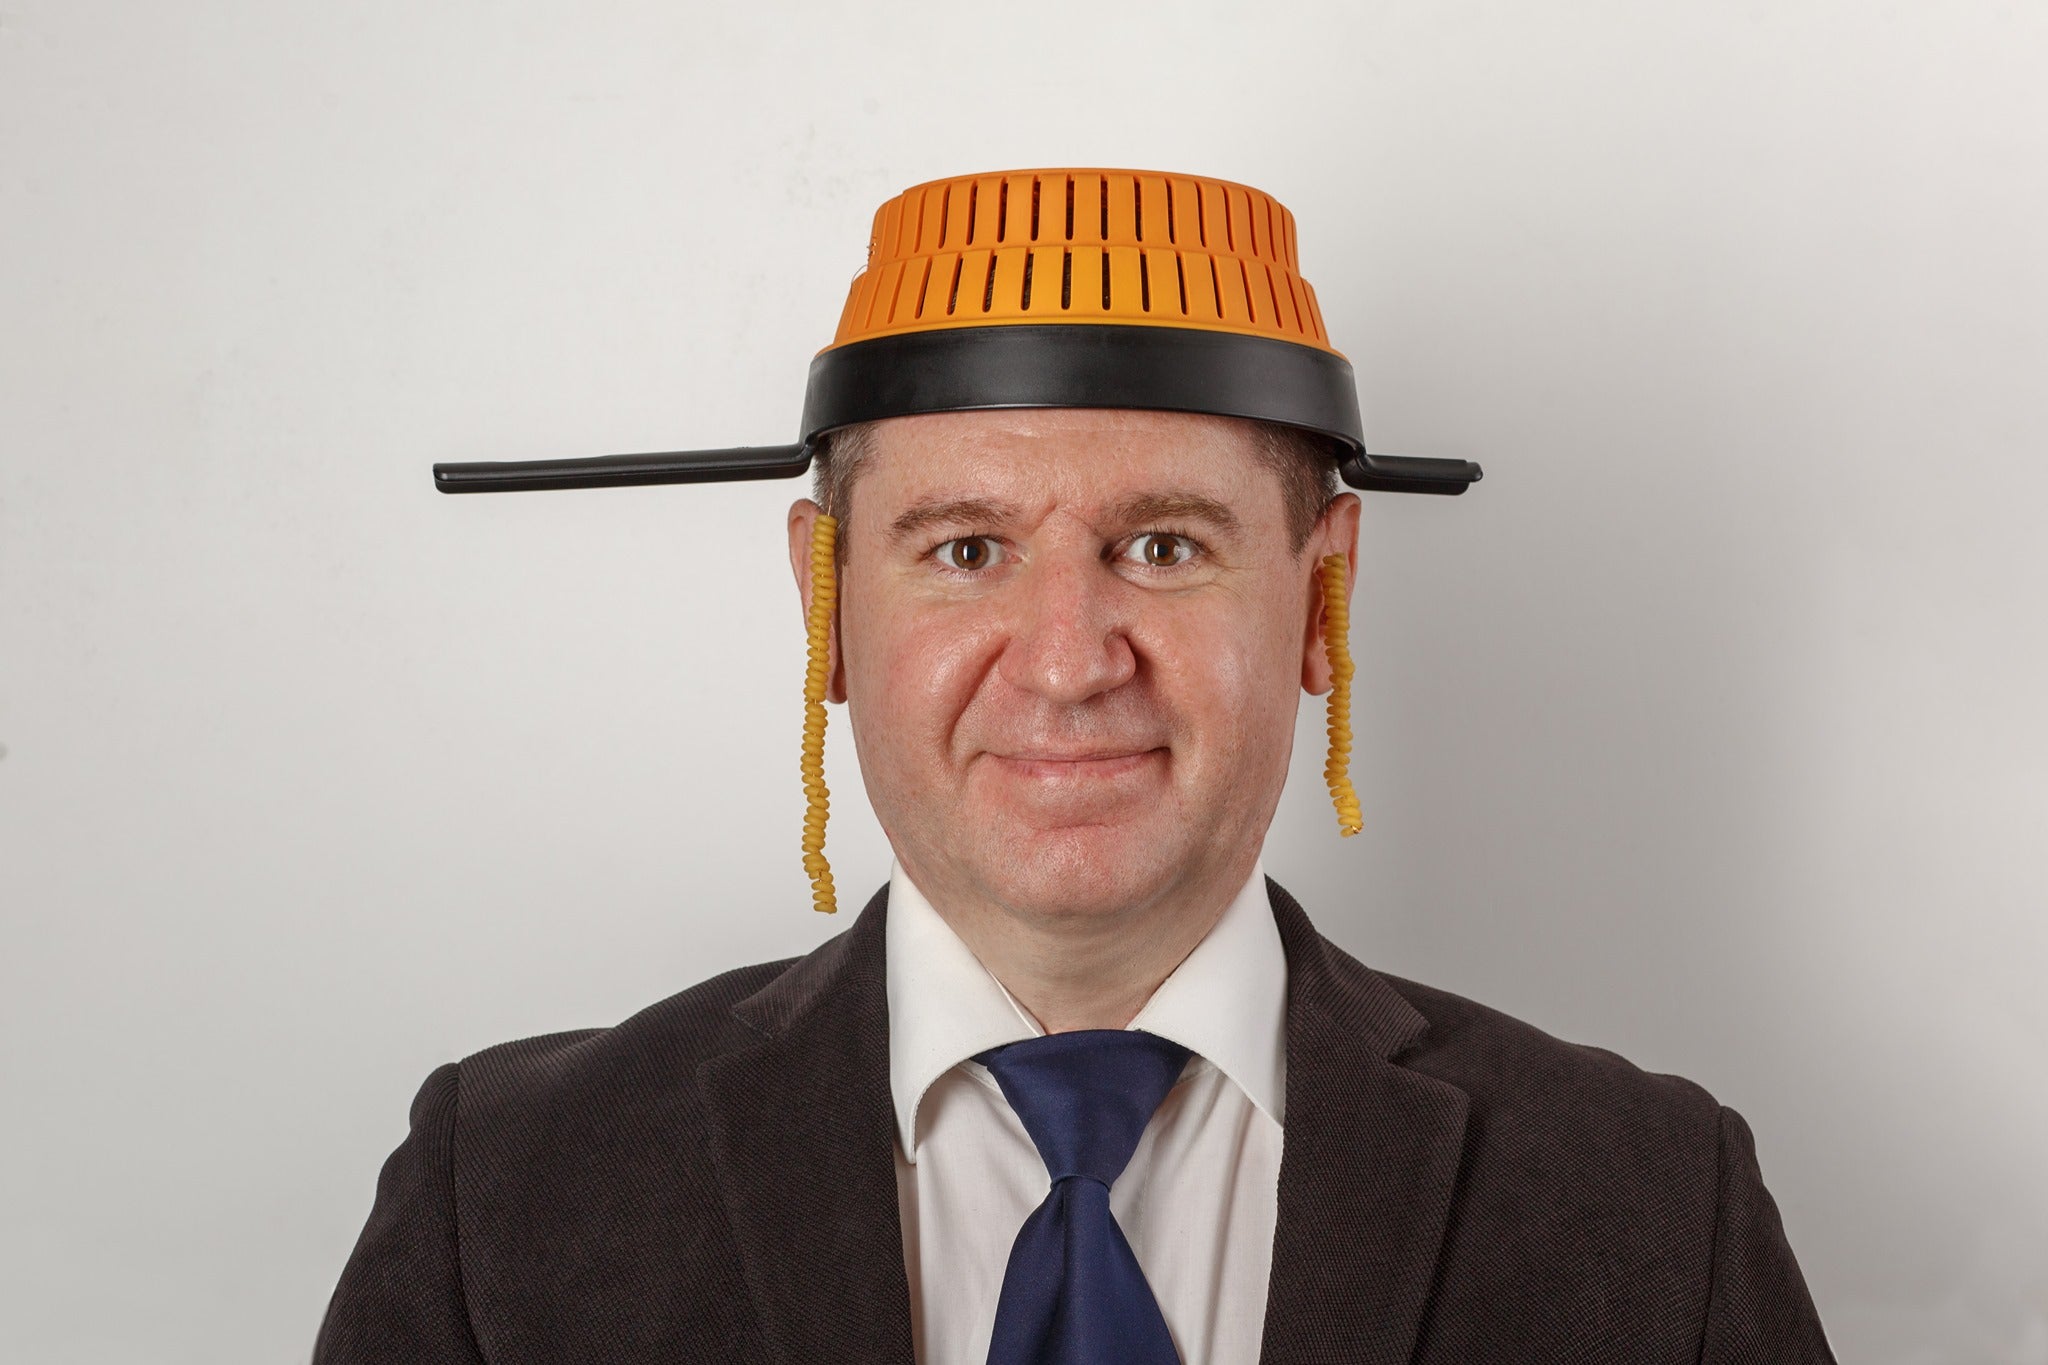 Mikhail Iosilevich, head of the local branch of the Church of the Flying Spaghetti Monster (Pastafarianism), an independent group,  November 2020.